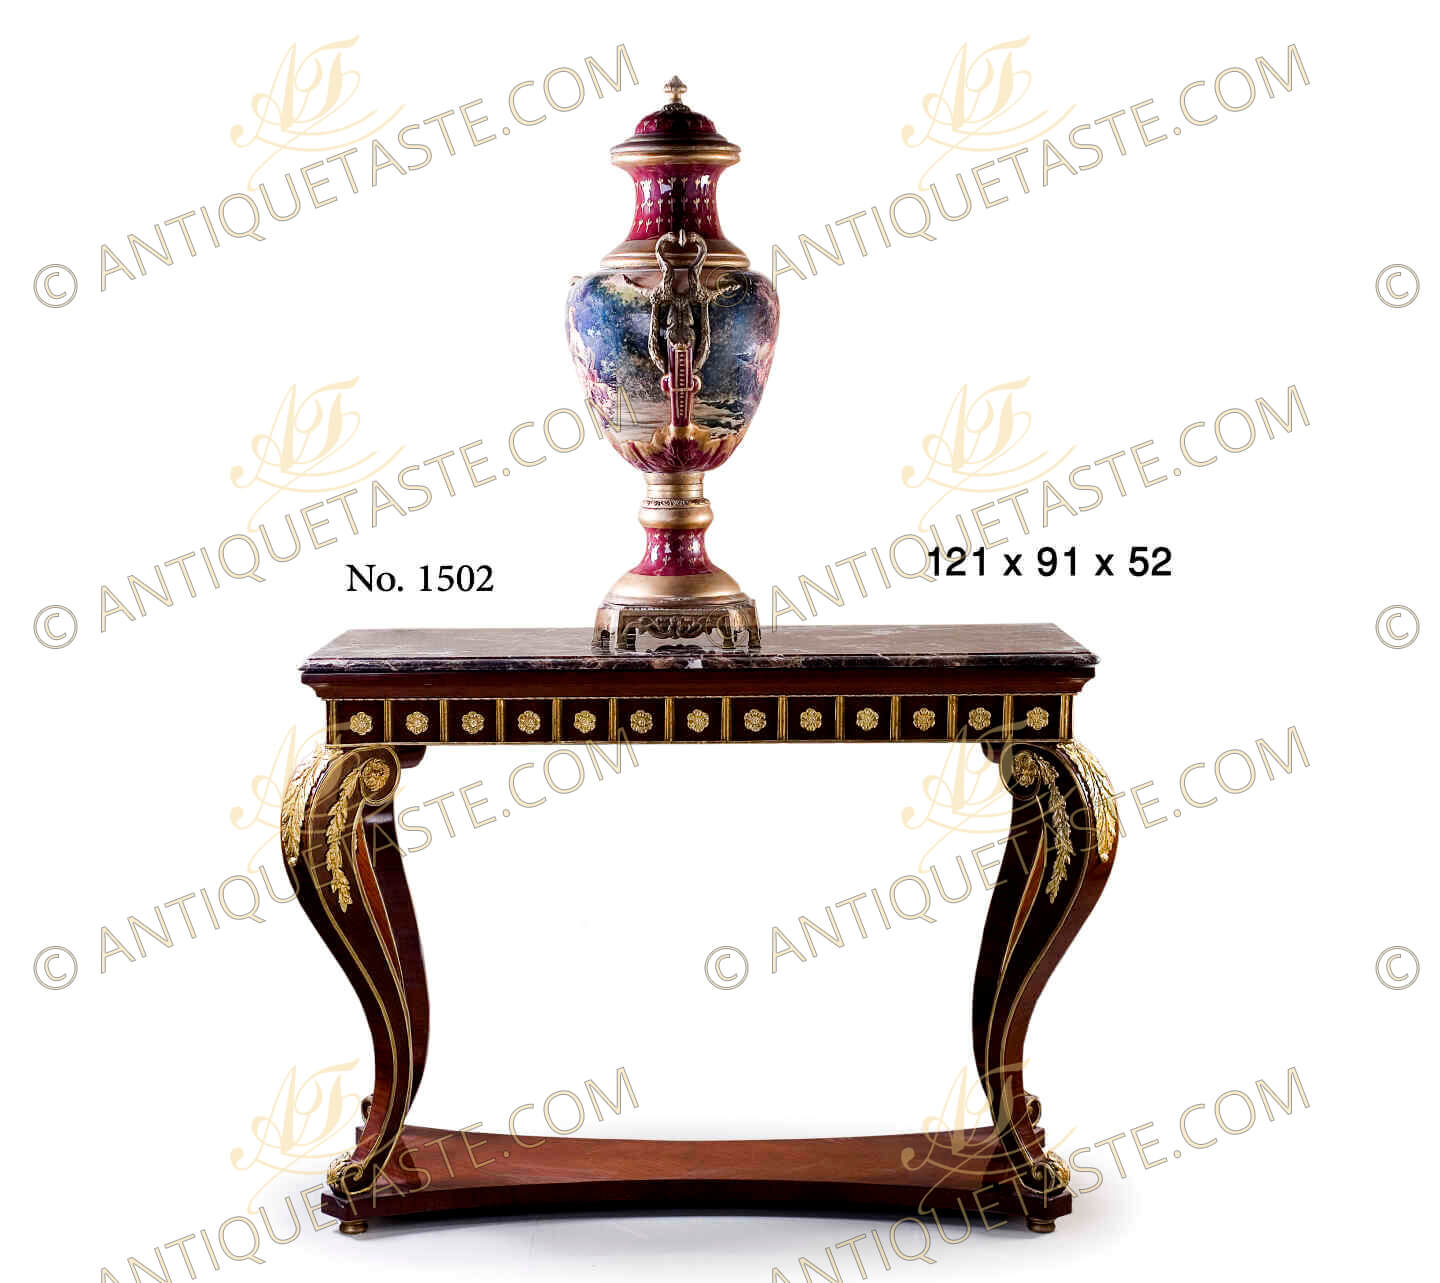 A statement making 19th century French Louis XV style freestanding ormolu-mounted veneer inlaid console table, Raised on four moulded and gilded bun feet below S scrolled robust volute cabriole legs connected by a bottom tier with concave sides and a mahogany quarter veneer pattern, The front of each leg is beautifully headed with a large ormolu acanthus leaf, each volute side is decorated with ormolu flower rosette issues ormolu leafy garland, terminating with a scrolled end adorned with a gilt-ormolu acanthus leaf, The outer contour of the legs is bordered with an ormolu band, above is the rectangular shaped apron with successive ormolu rosettes within ormolu squares under the beveled marble top